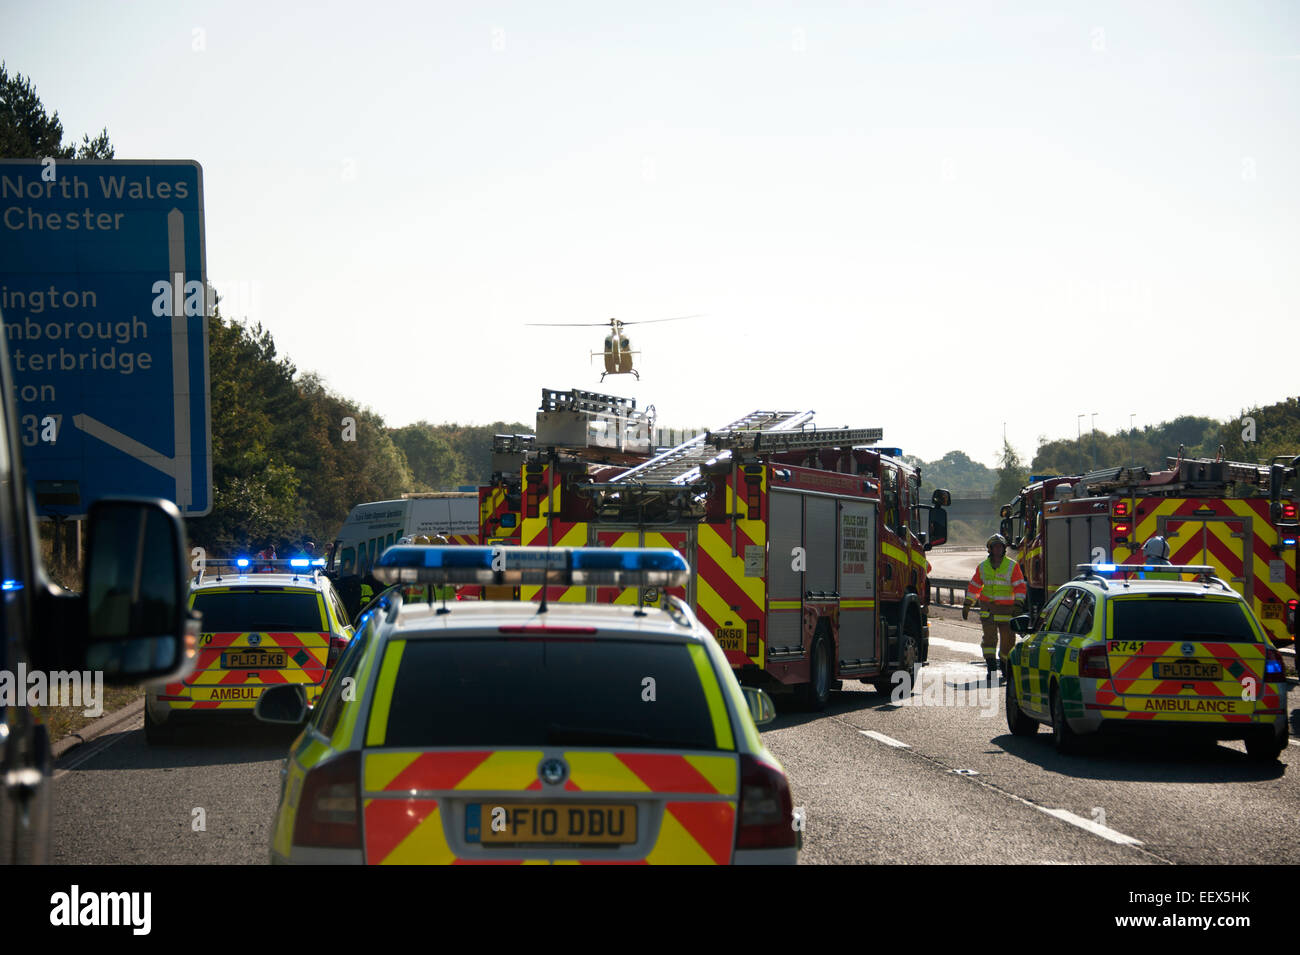 Police Fire Ambulance Motorway Air Helicopter RTC Stock Photo